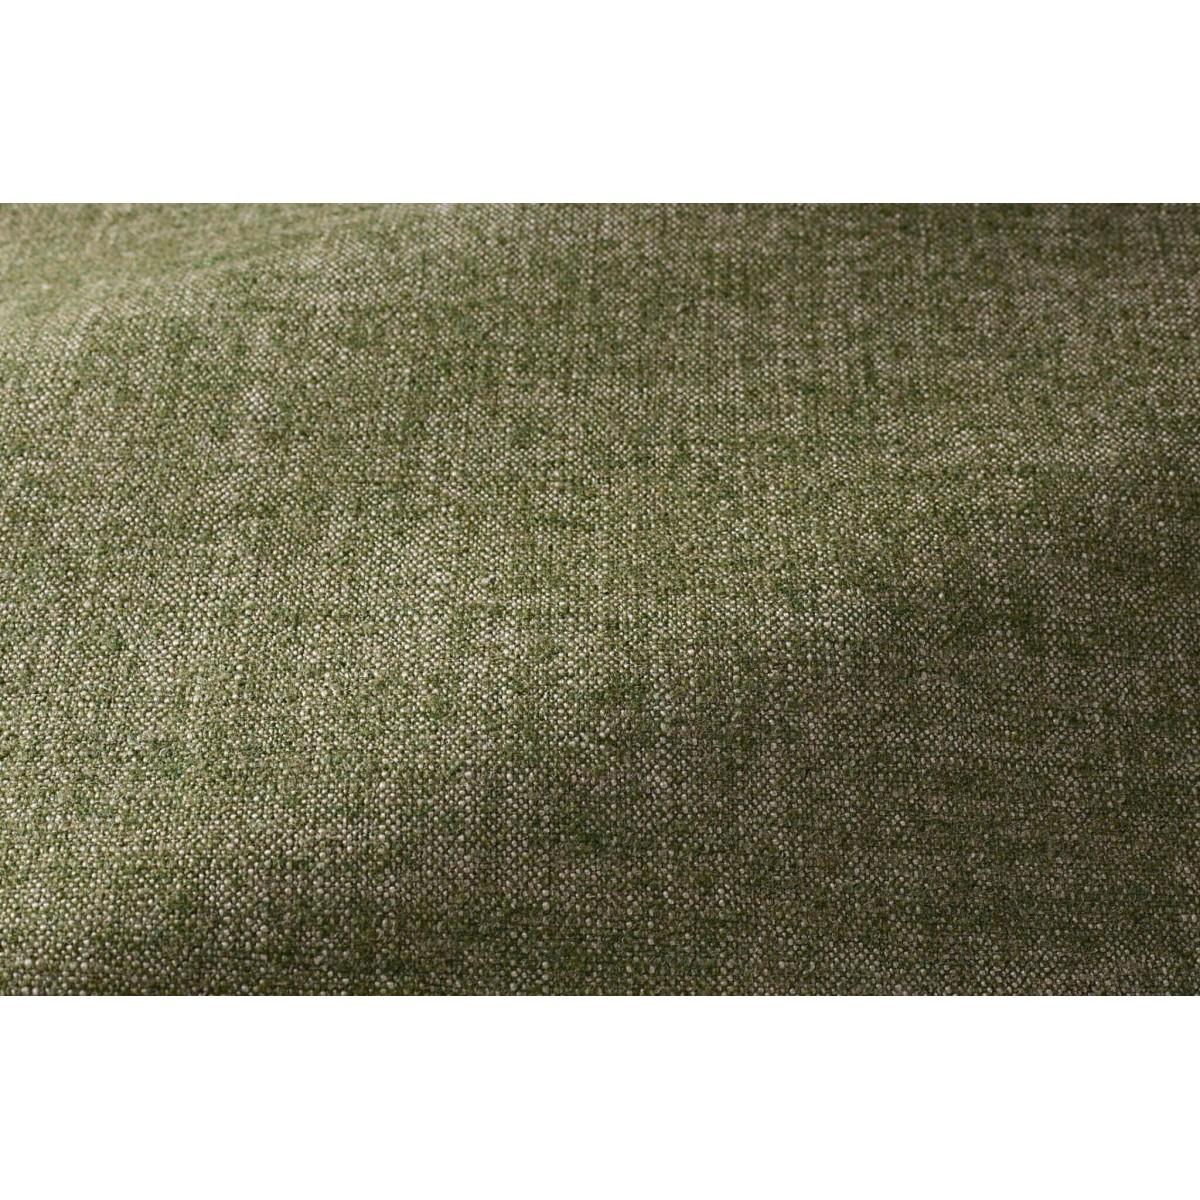 Popus Editions Giovanna 2.5 Seater Sofa in Cactus London Linen Fabric

Giovanna is a sofa with a strong profile. A sober, plush line, with this famous detail that changes everything, so as not to forget its strength of character and this charming